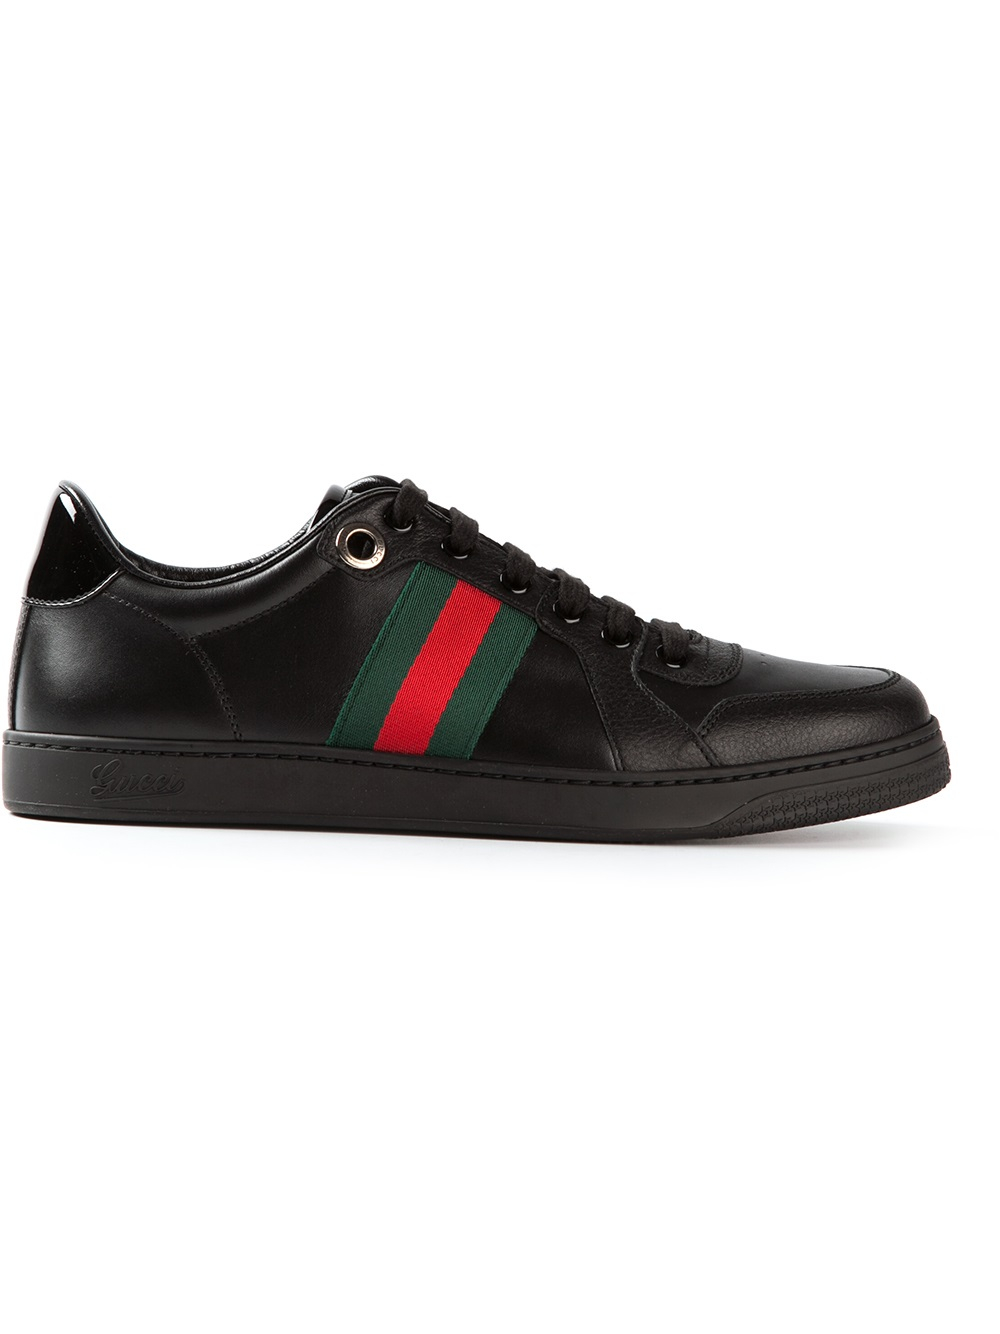 Lyst - Gucci Classic Sneakers in Black for Men